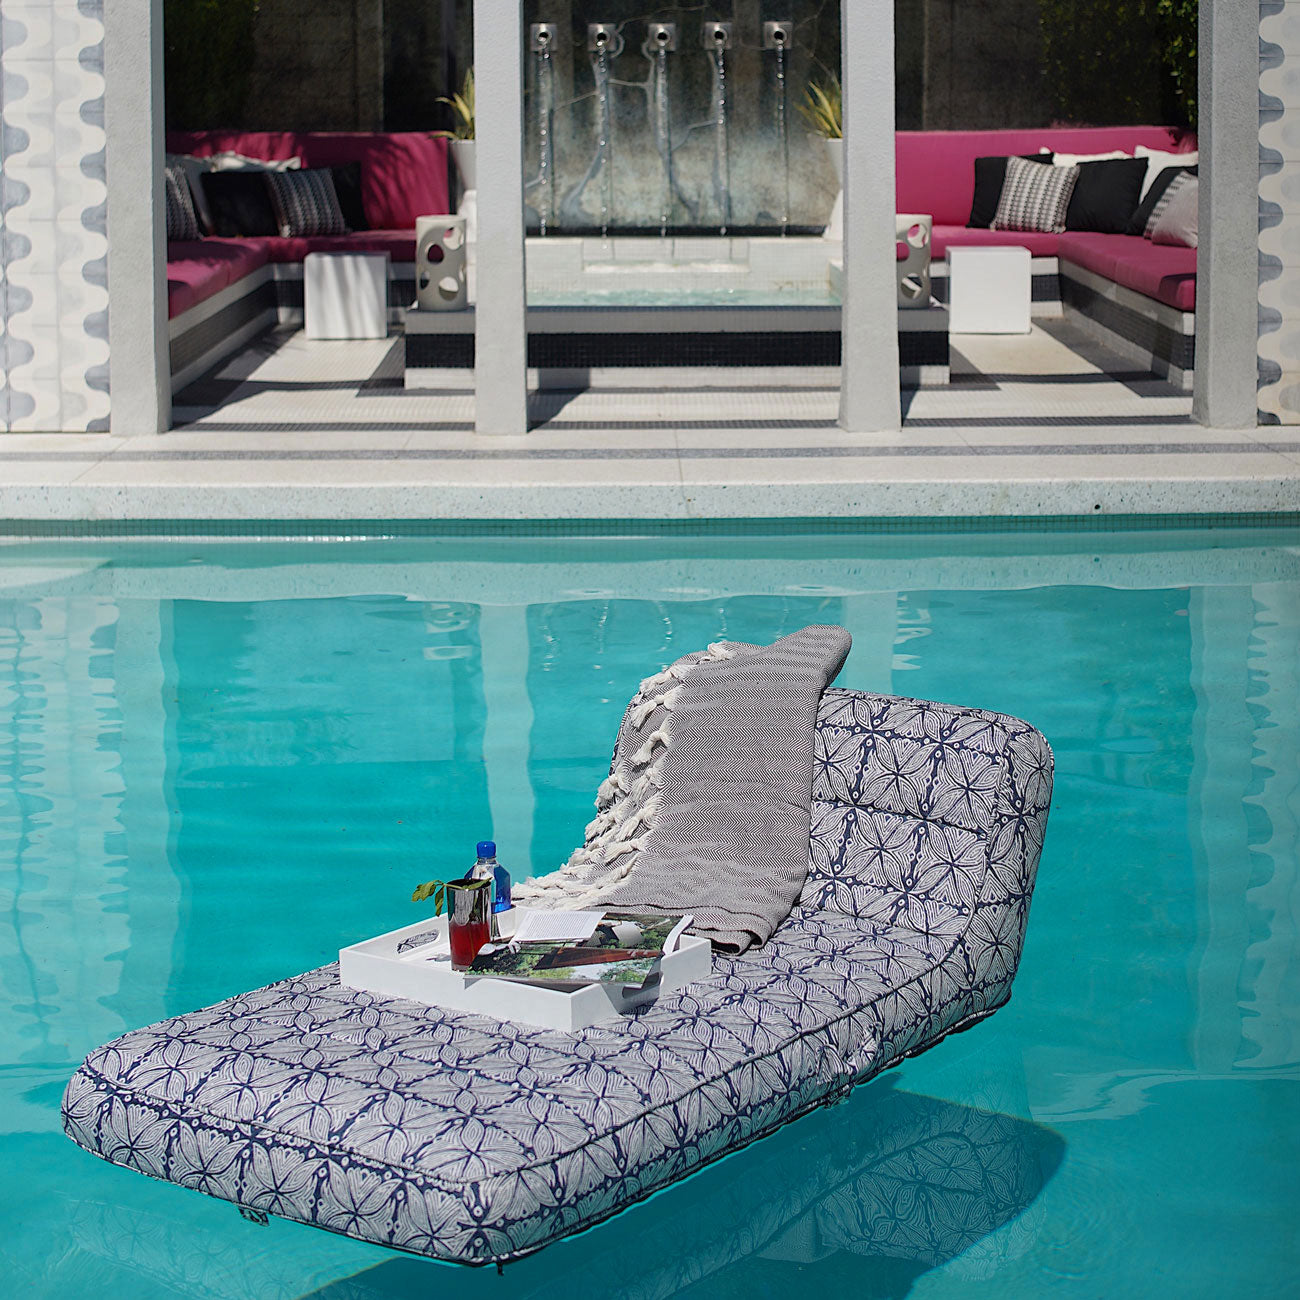 A blue and white patterned pool float lounger for adults floating in a swimming pool with a tray and throw over the lilo.